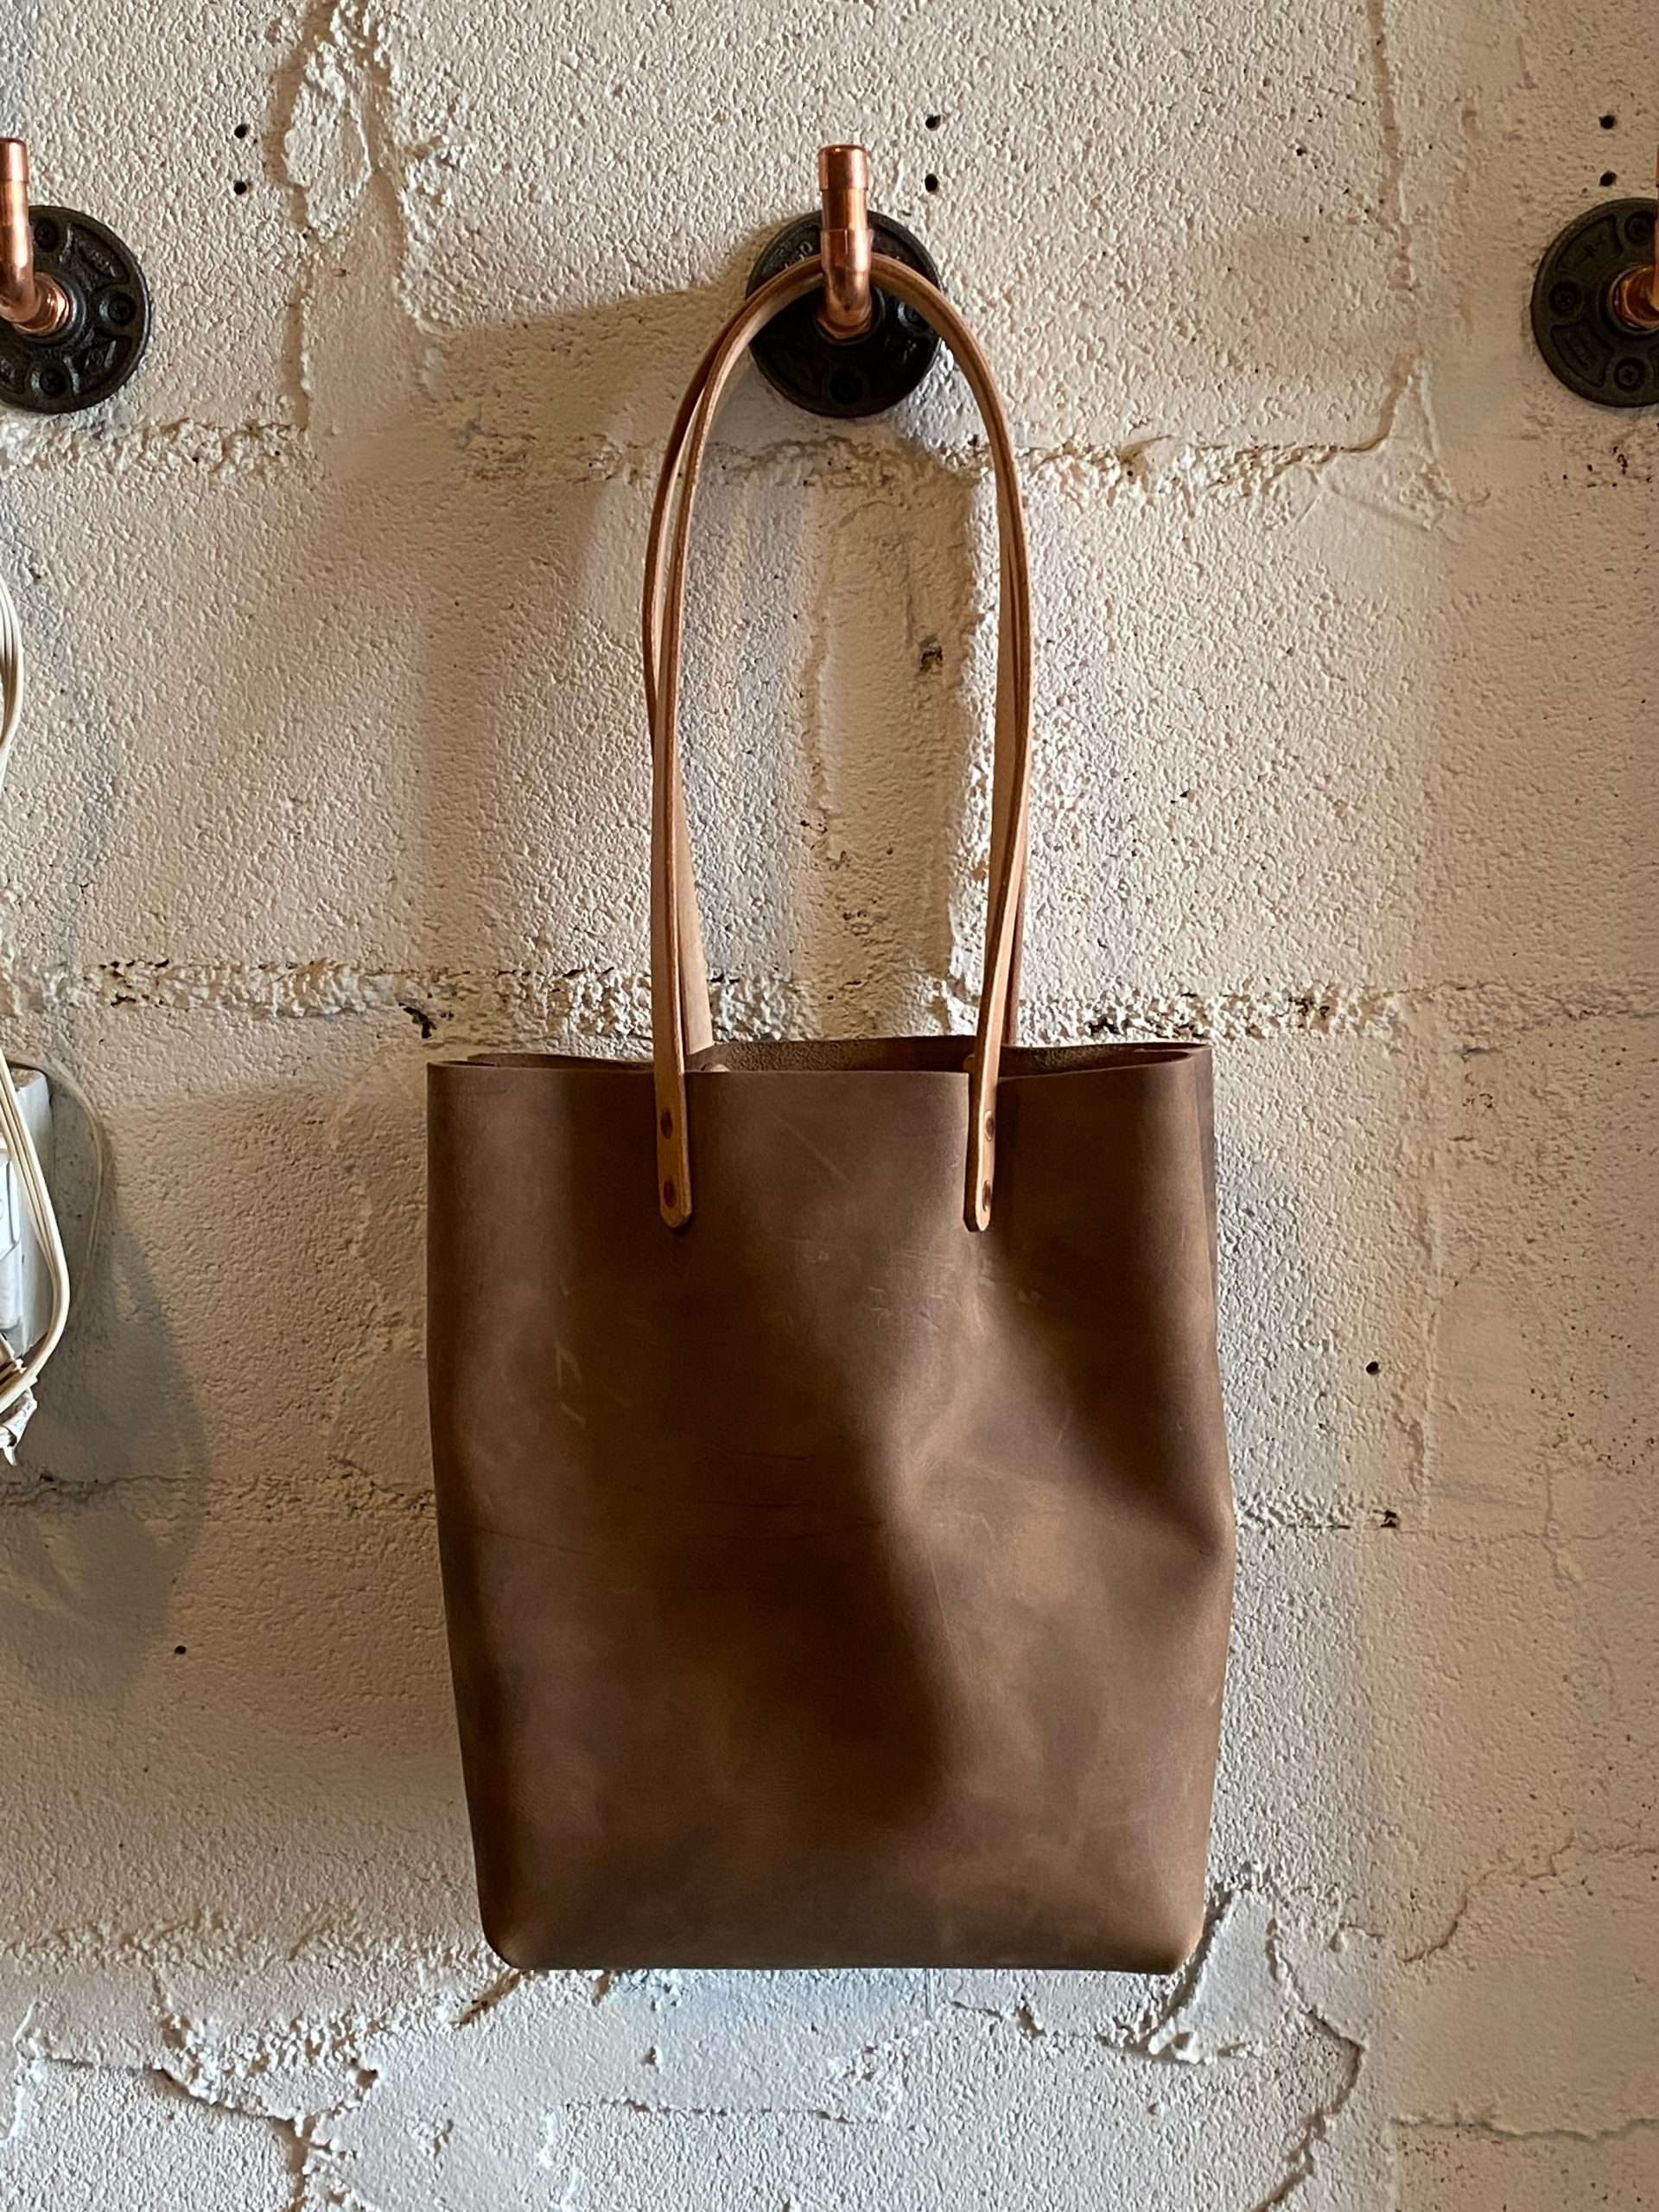 Leather tote bag on metal hook against white brick wall